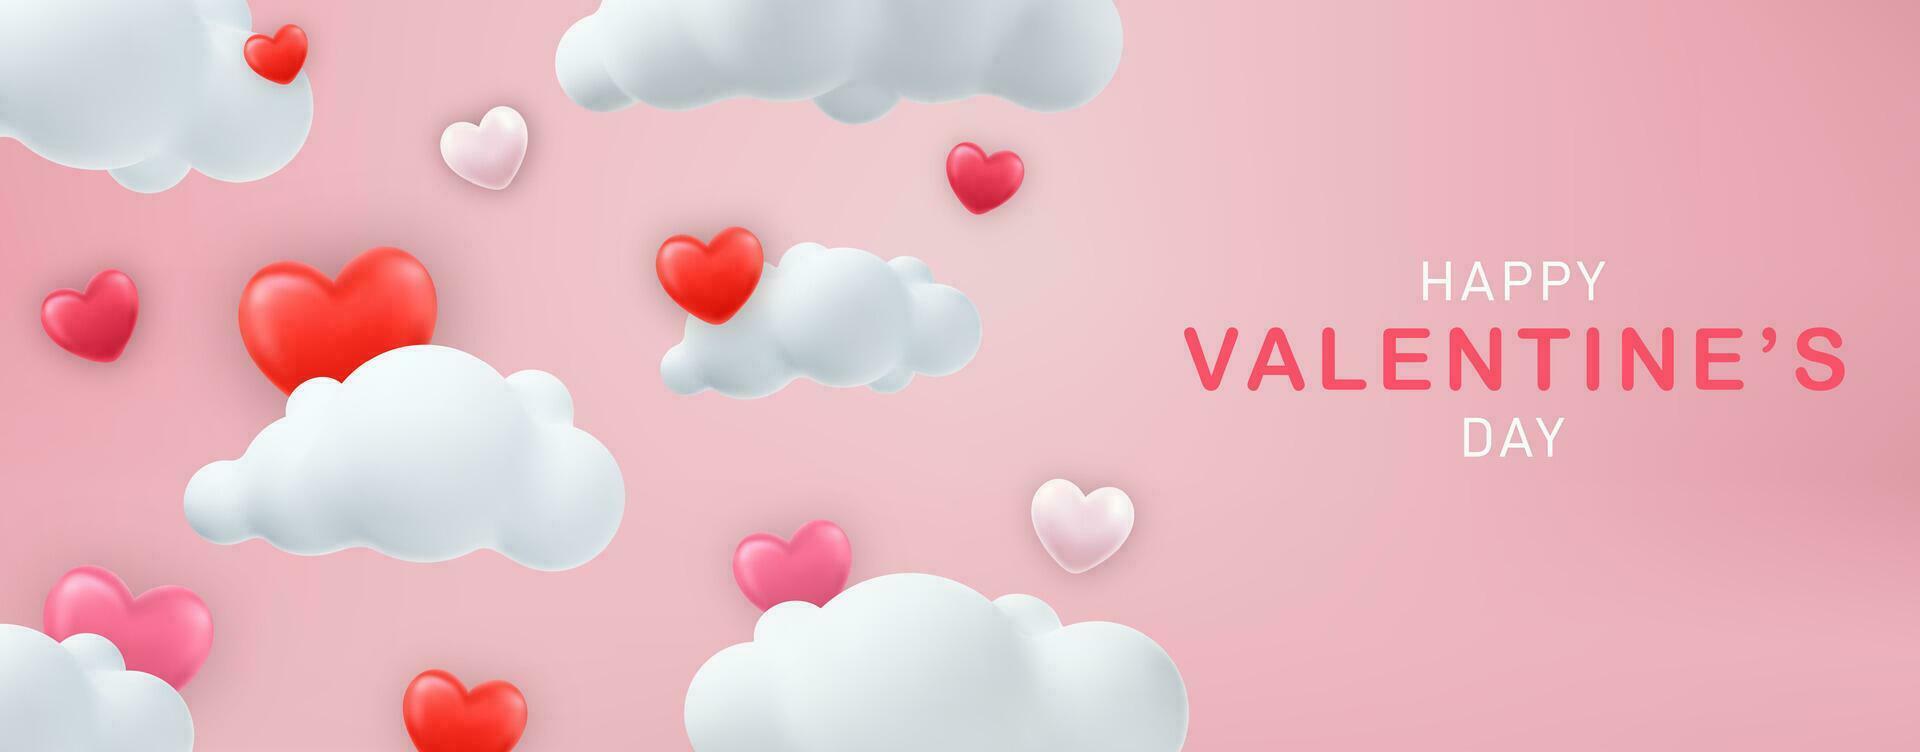 Horizontal banner with 3D heart on cloud background. Place for text. voucher template with hearts. Love concept for happy mother s day, valentine s day, birthday day. Vector illustration